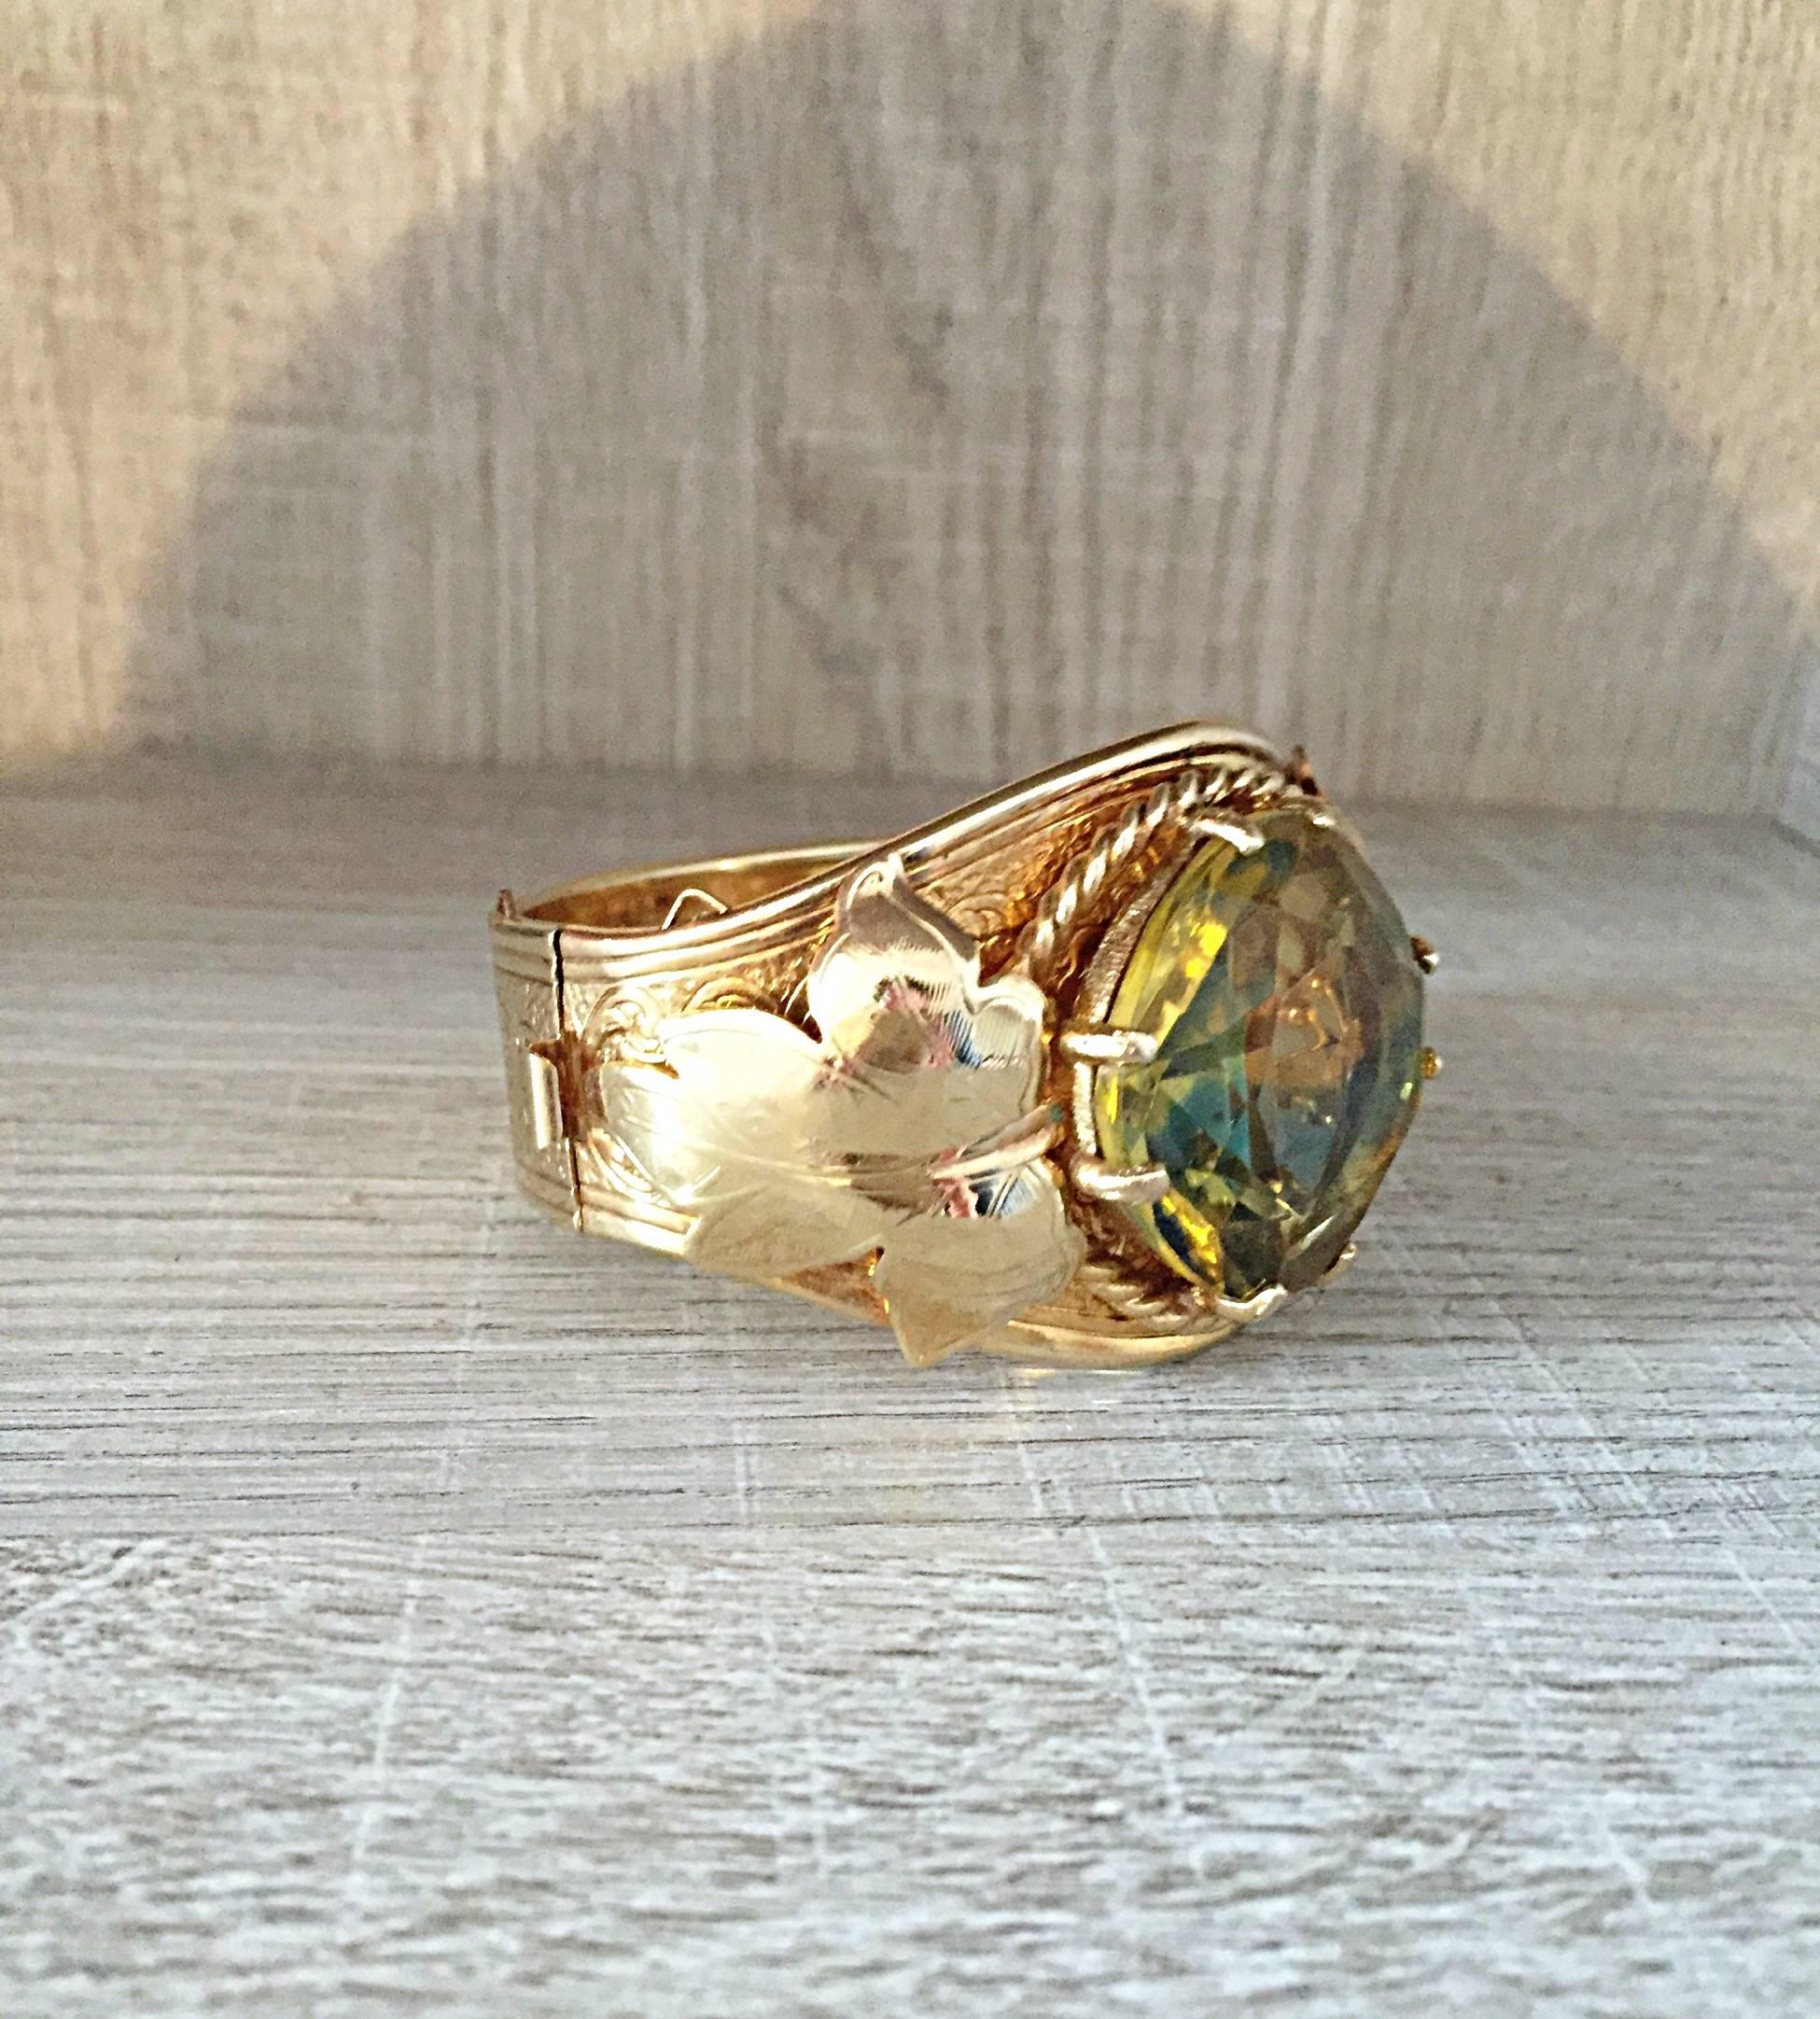 Beautiful 70s Sarah Coventry gold hinged metal bracelet with a large yellow green stone. The bangle is 2 1/4 inches in diameter in the closed position.  It has a 1 1/4 inch diameter stone that is faceted. The stone is held in place by 8 prongs and